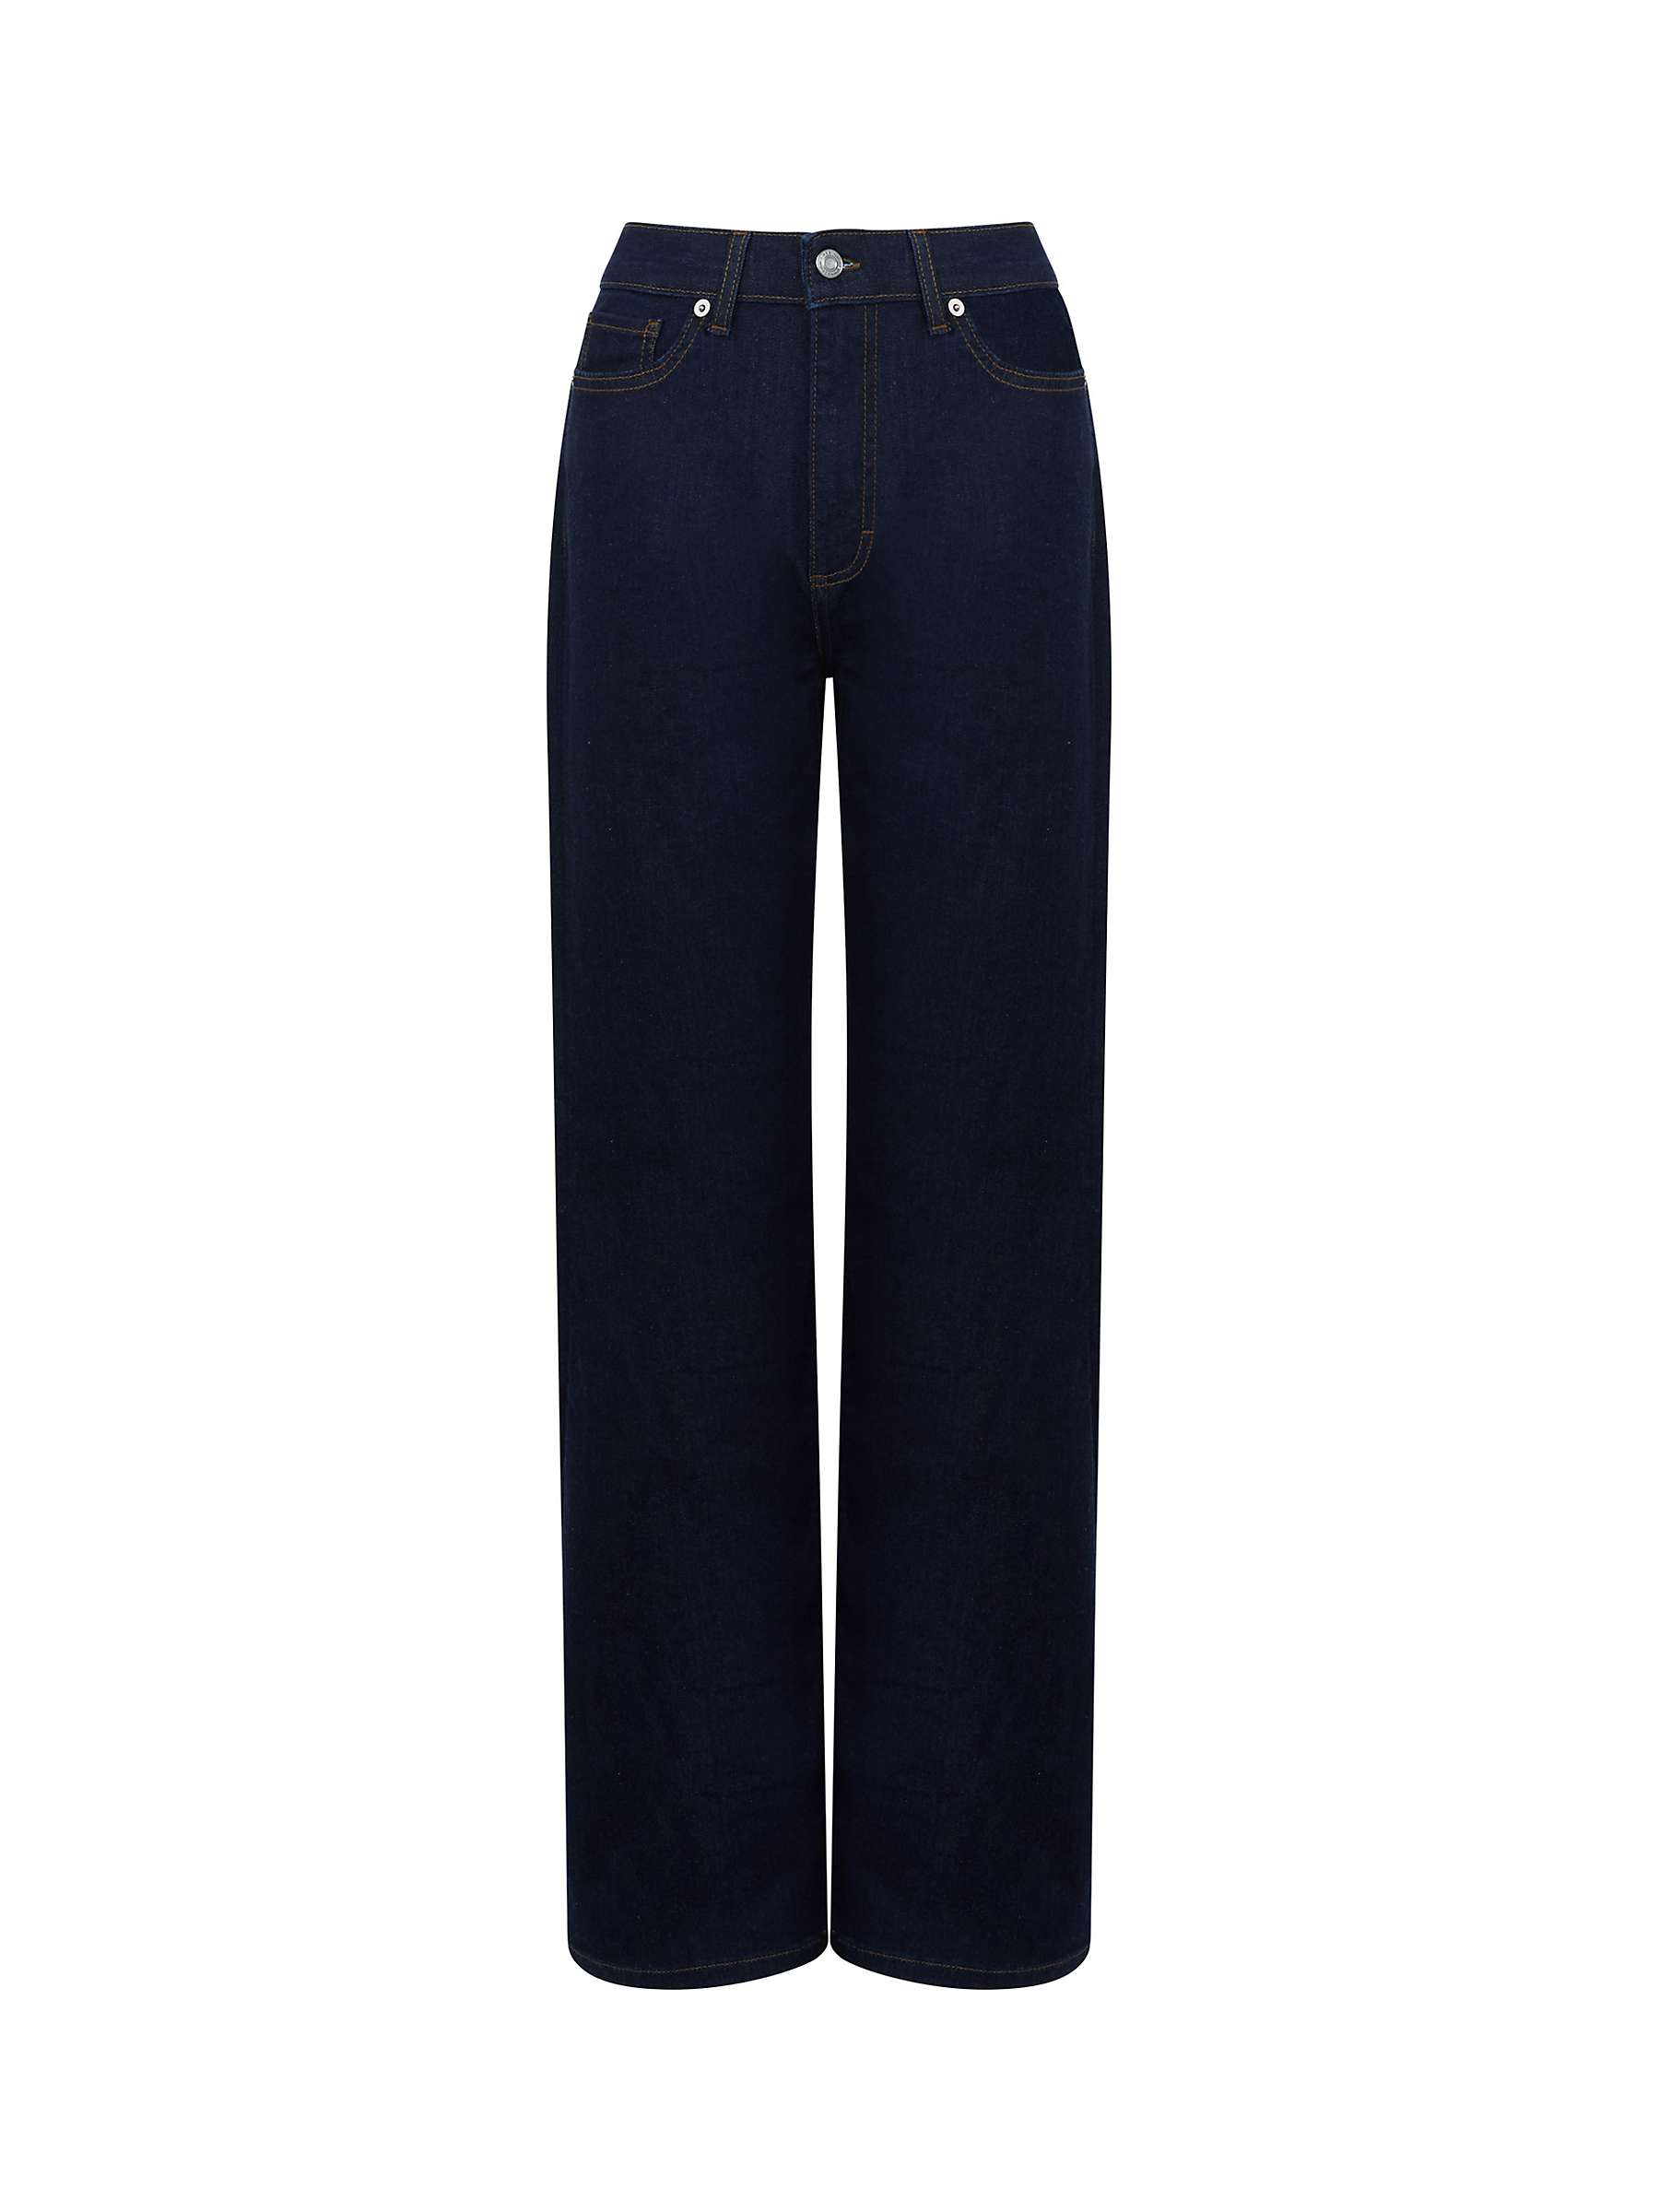 French Connection Stretch Wide Leg Jeans, Clean Indigo at John Lewis ...